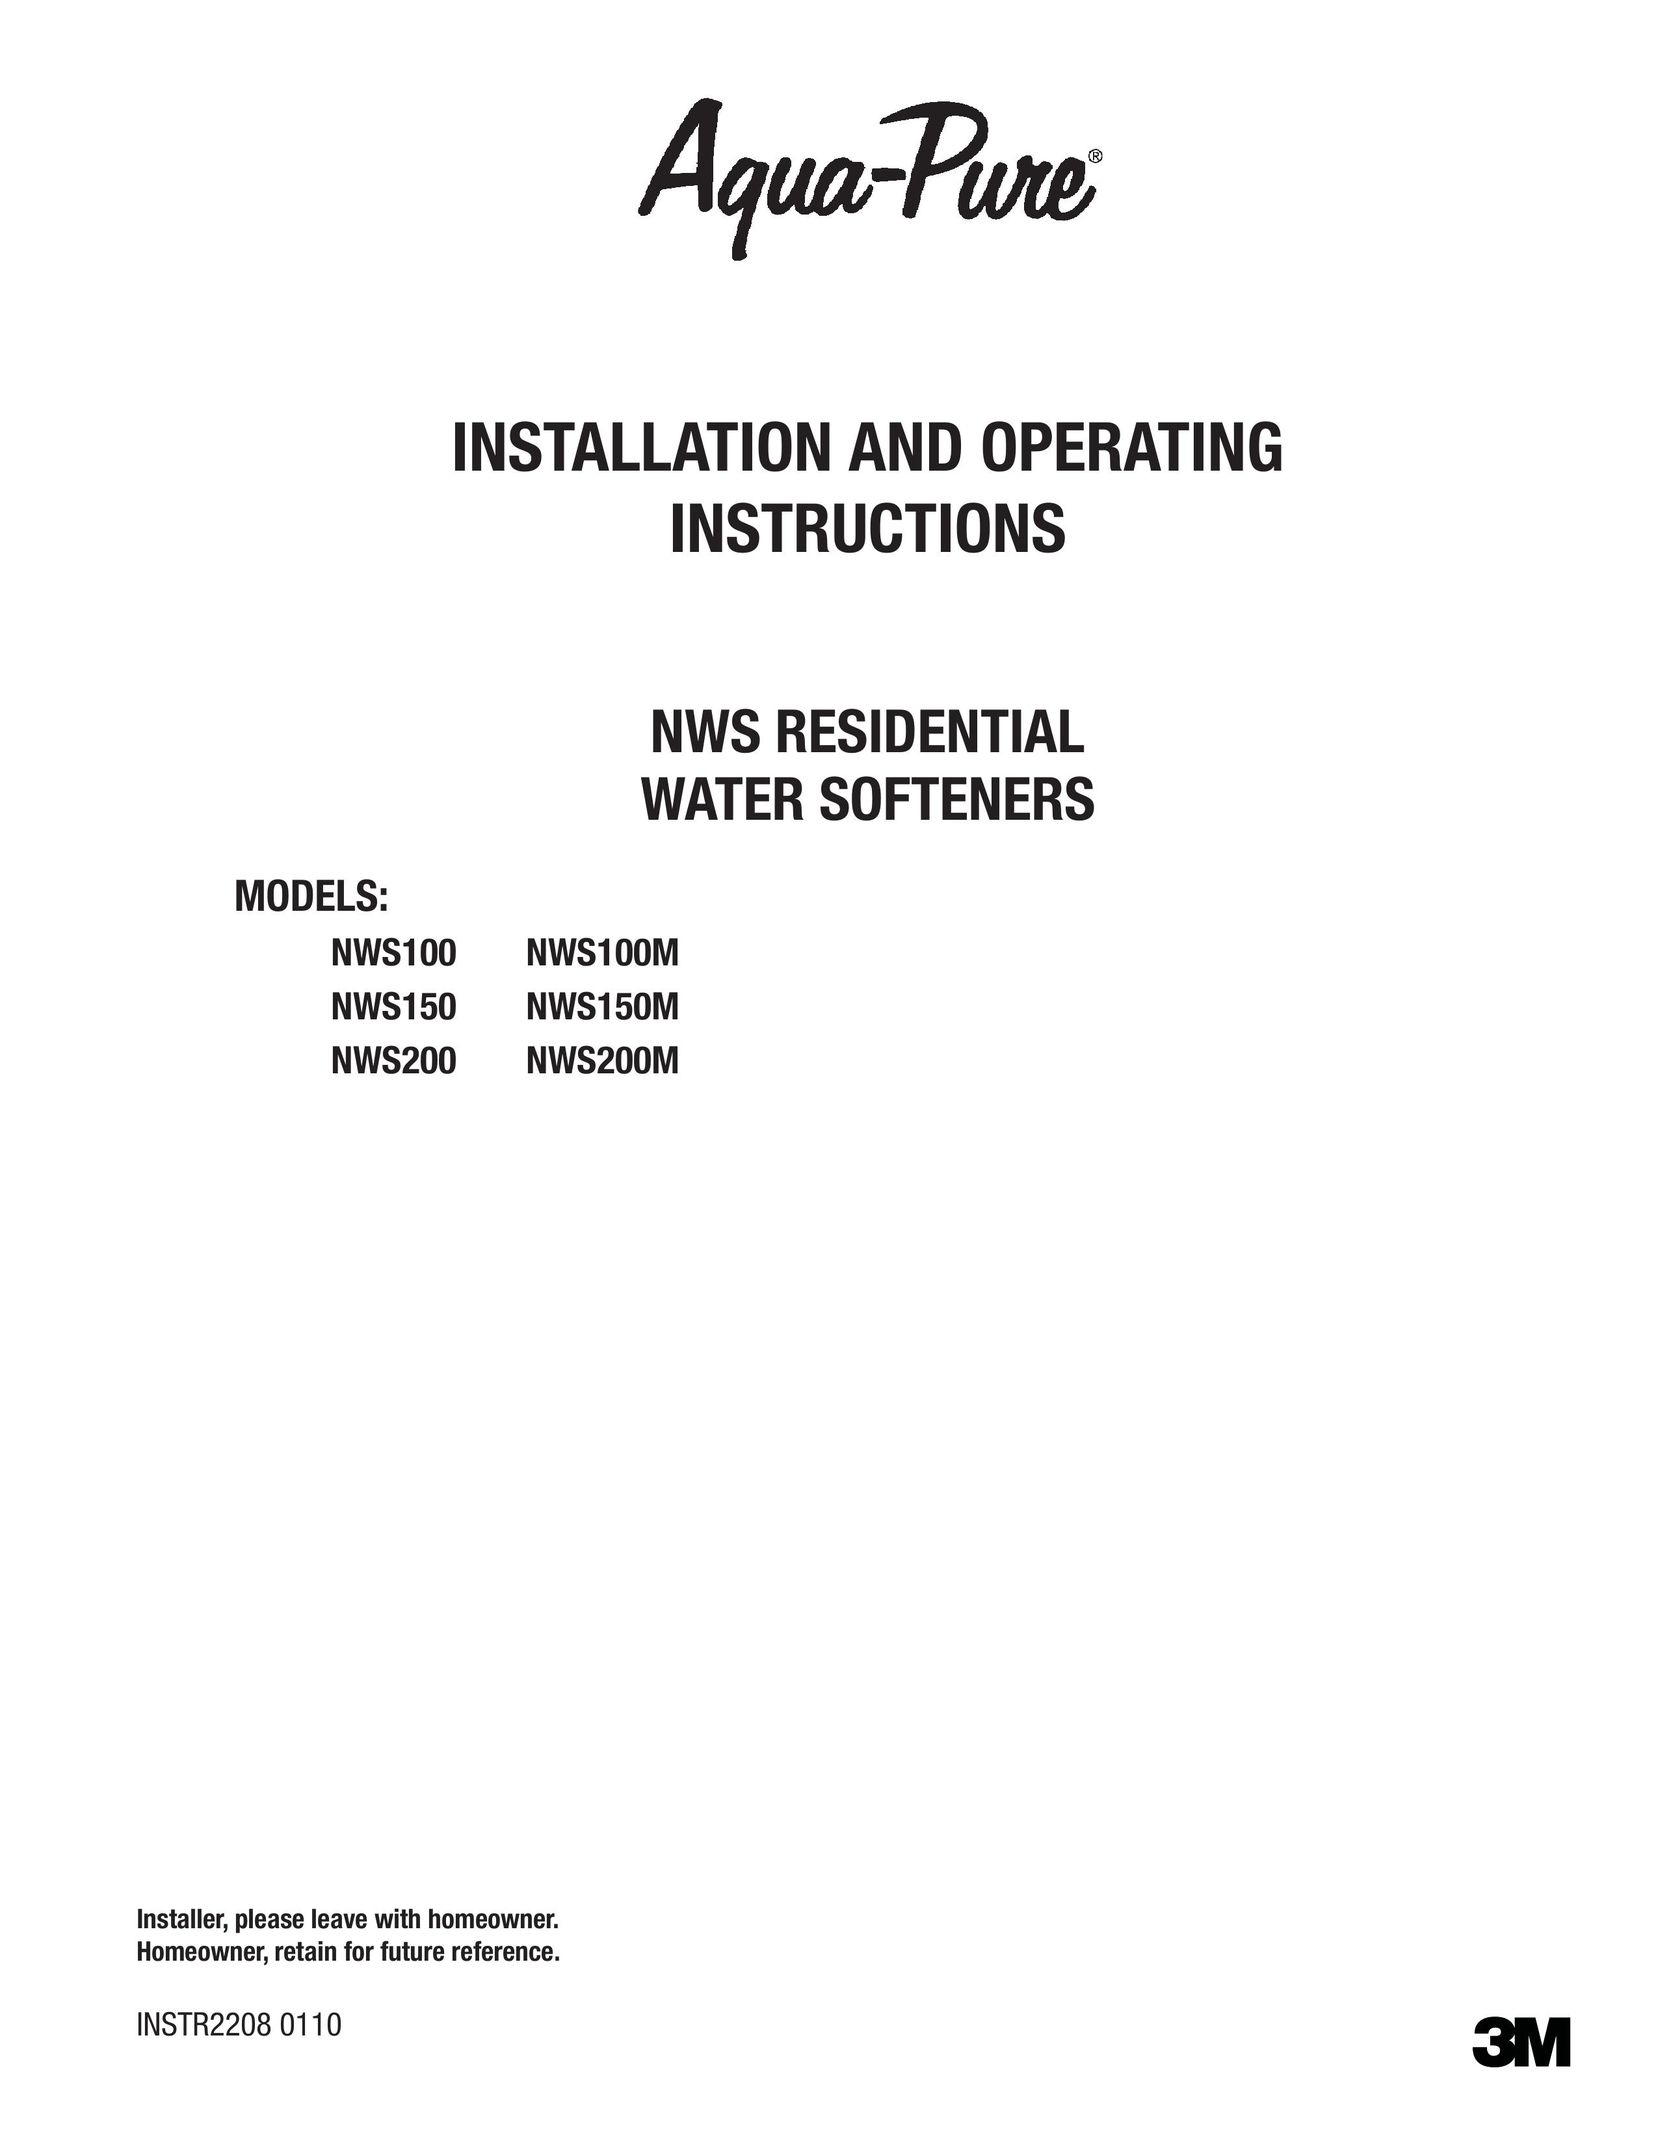 3M NWS200 Water System User Manual